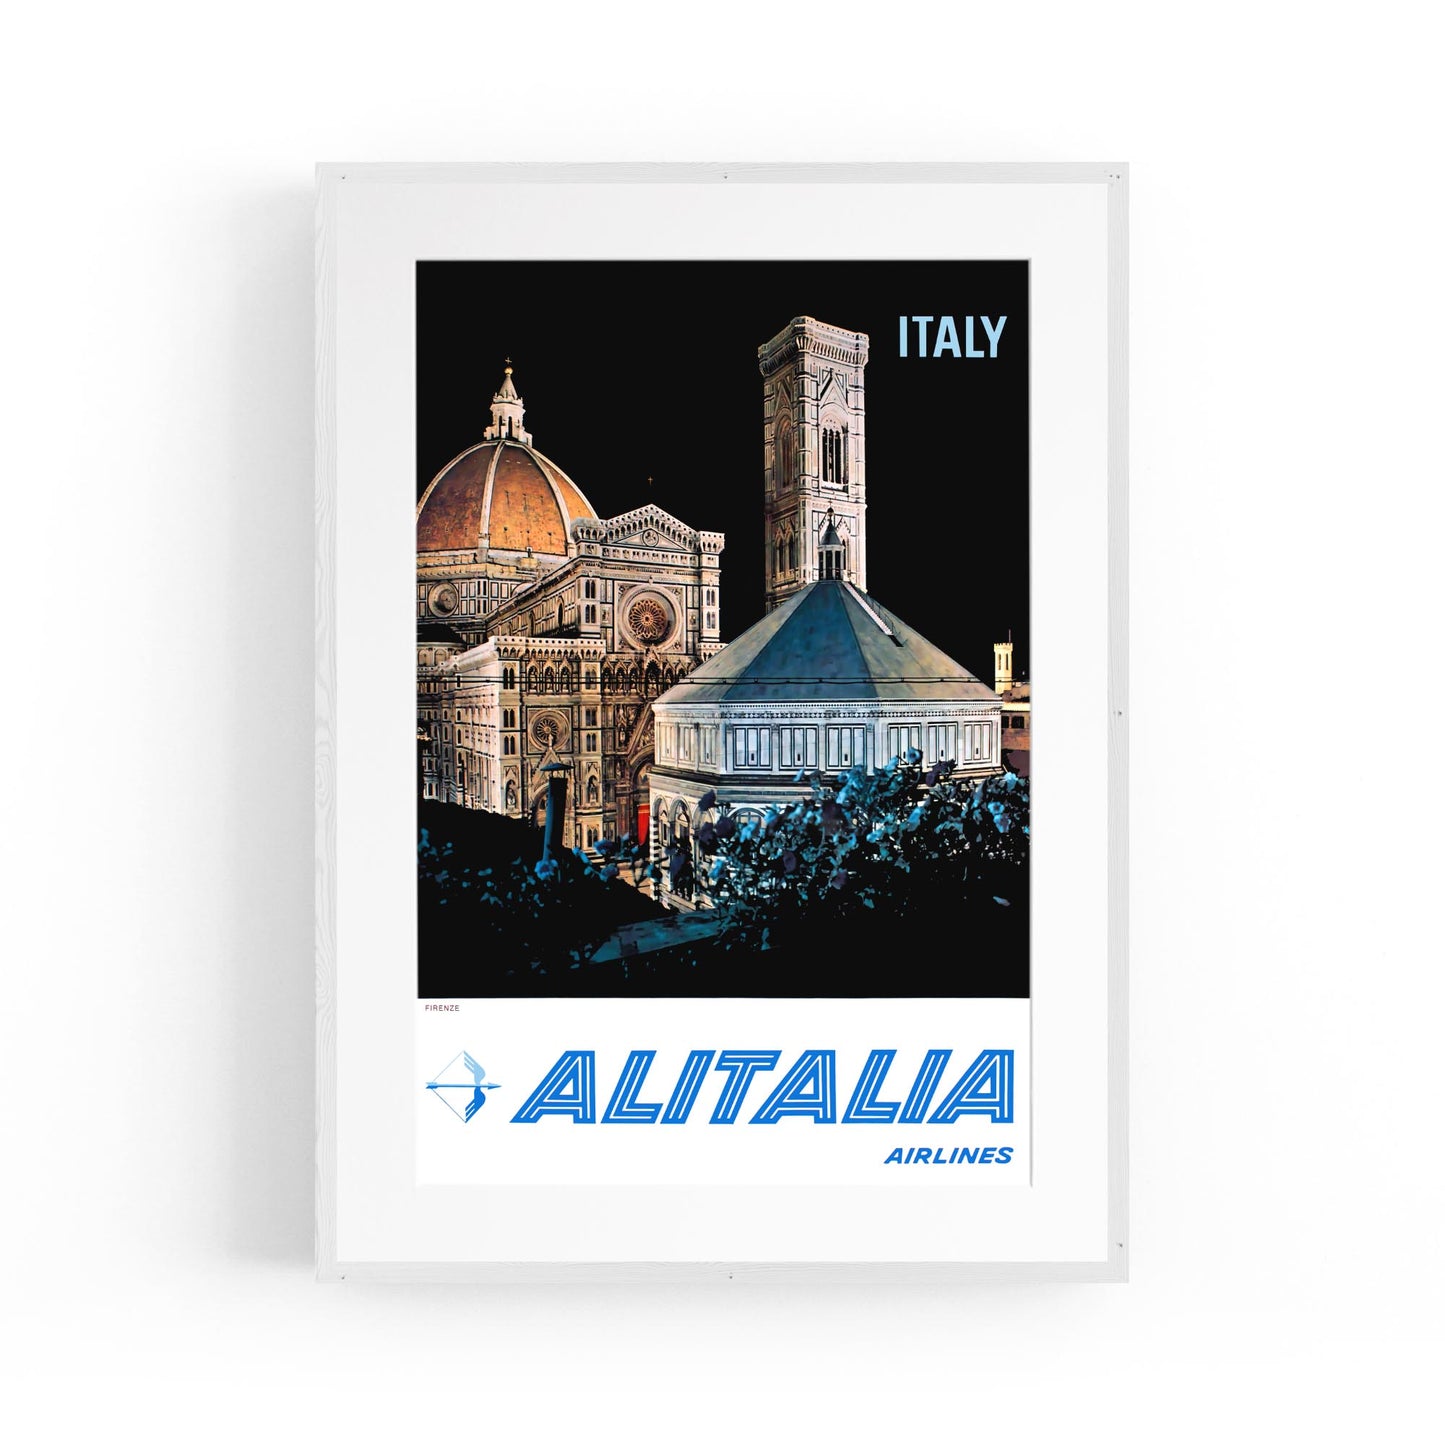 Florence, Italy "Alitalia Airlines" | Framed Vintage Travel Poster